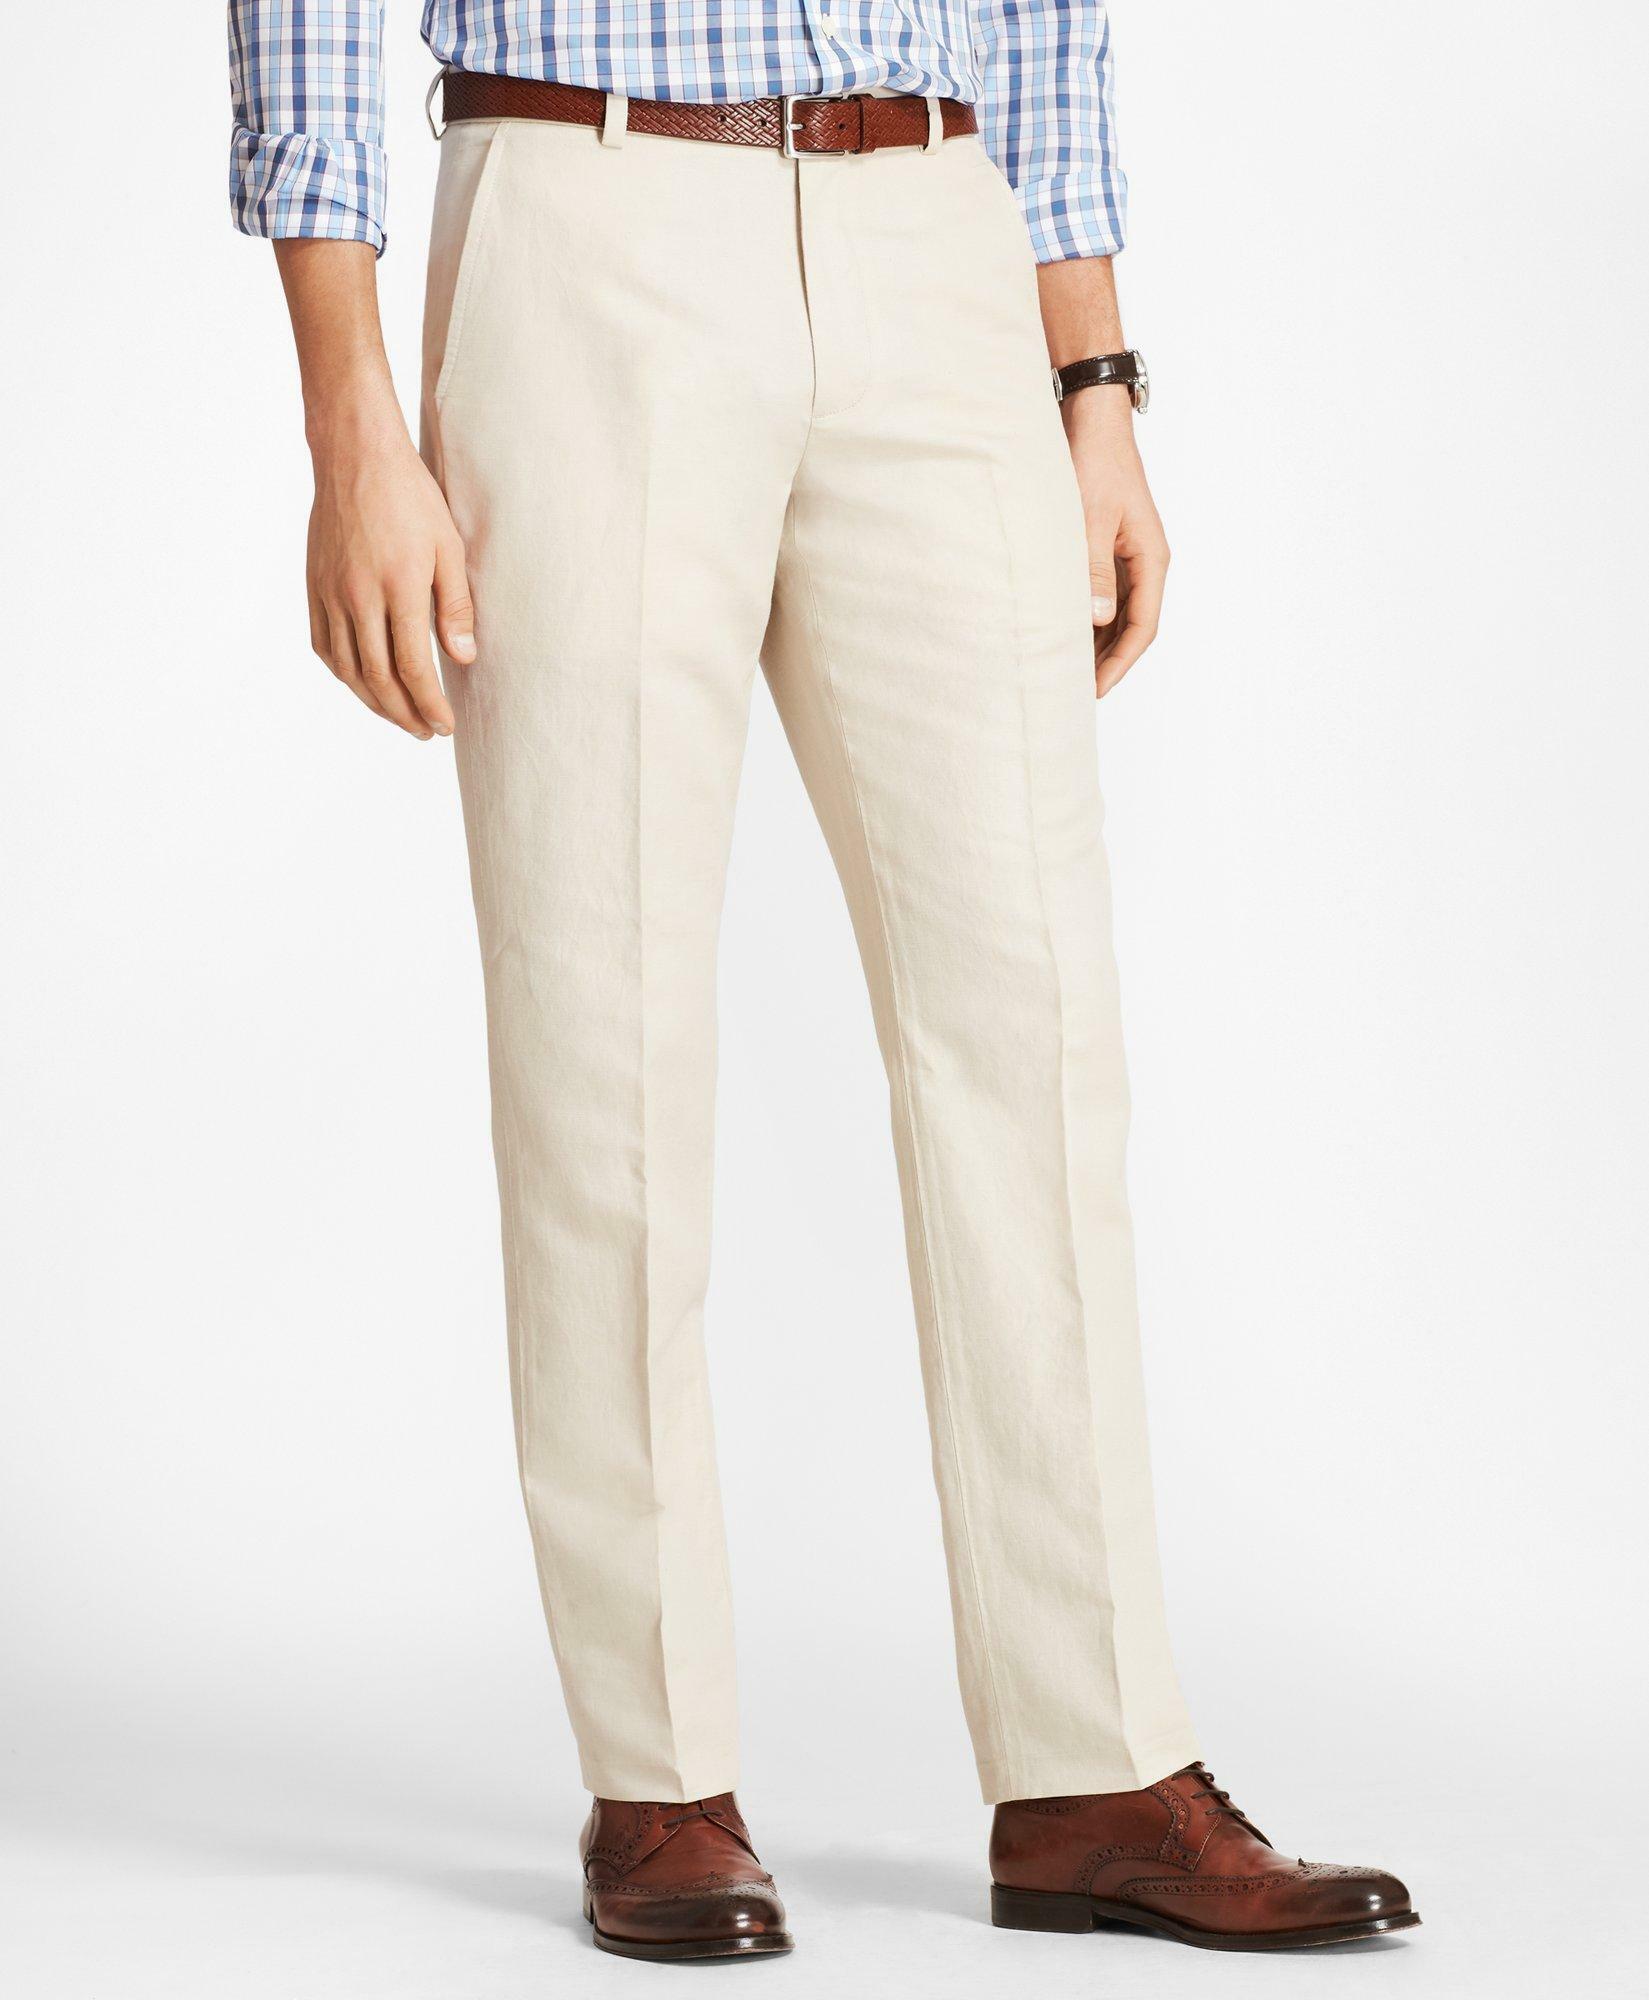 Brooks Brothers Men's Clark Fit Linen and Cotton Chino Pants | Oatmeal ...